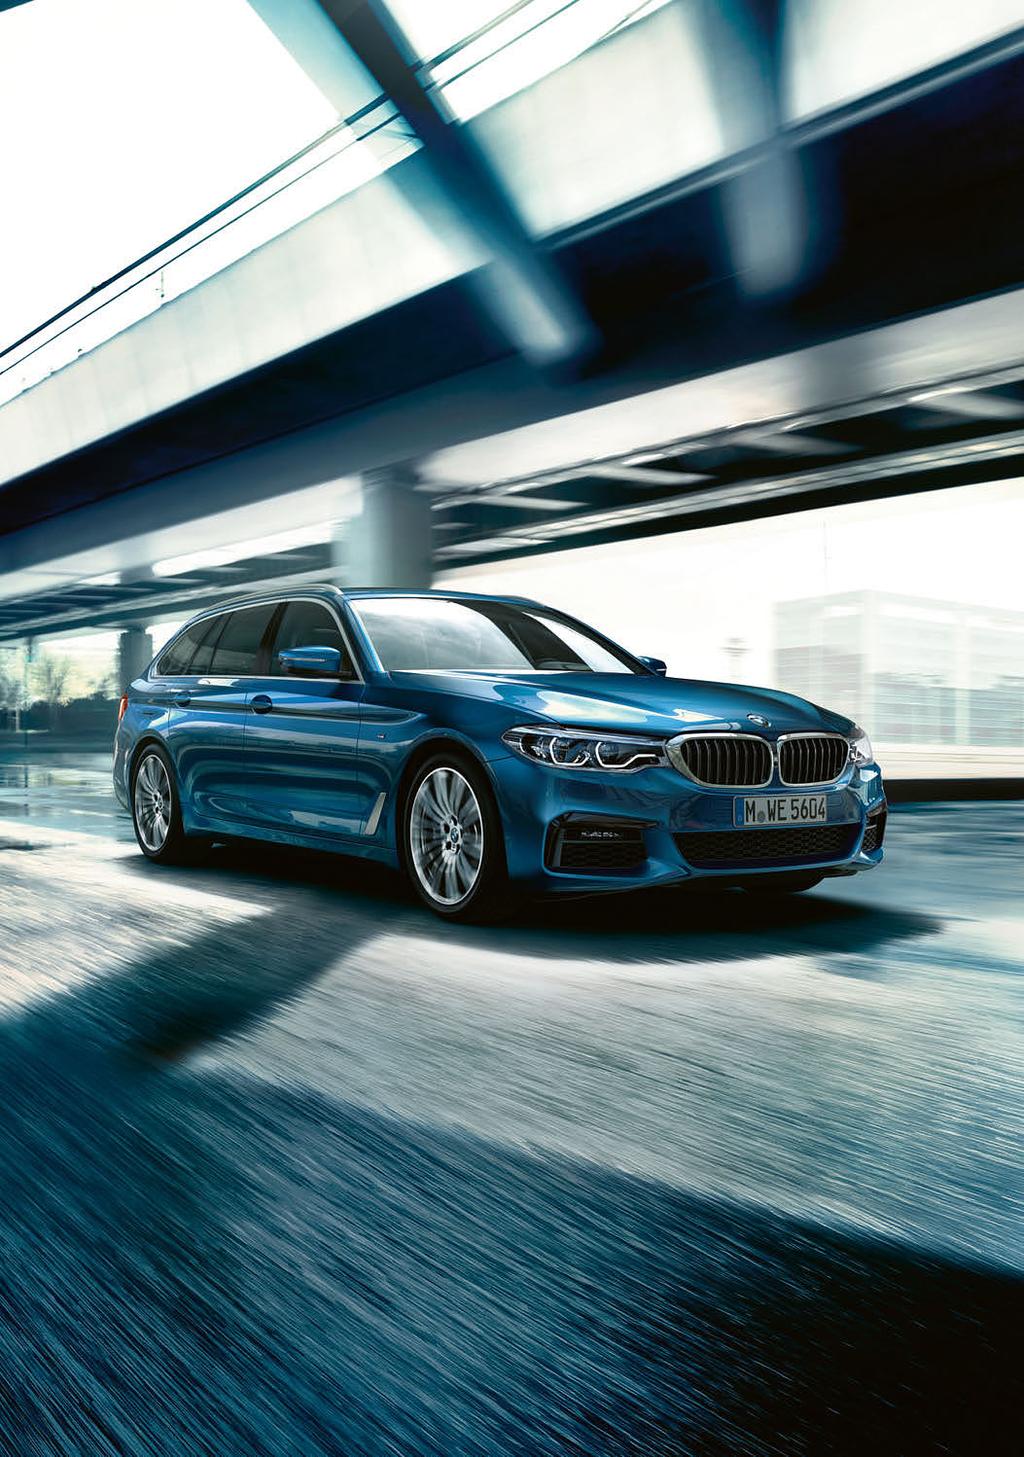 The Ultimate Driving Machine THE BMW 5 SERIES TOURING.